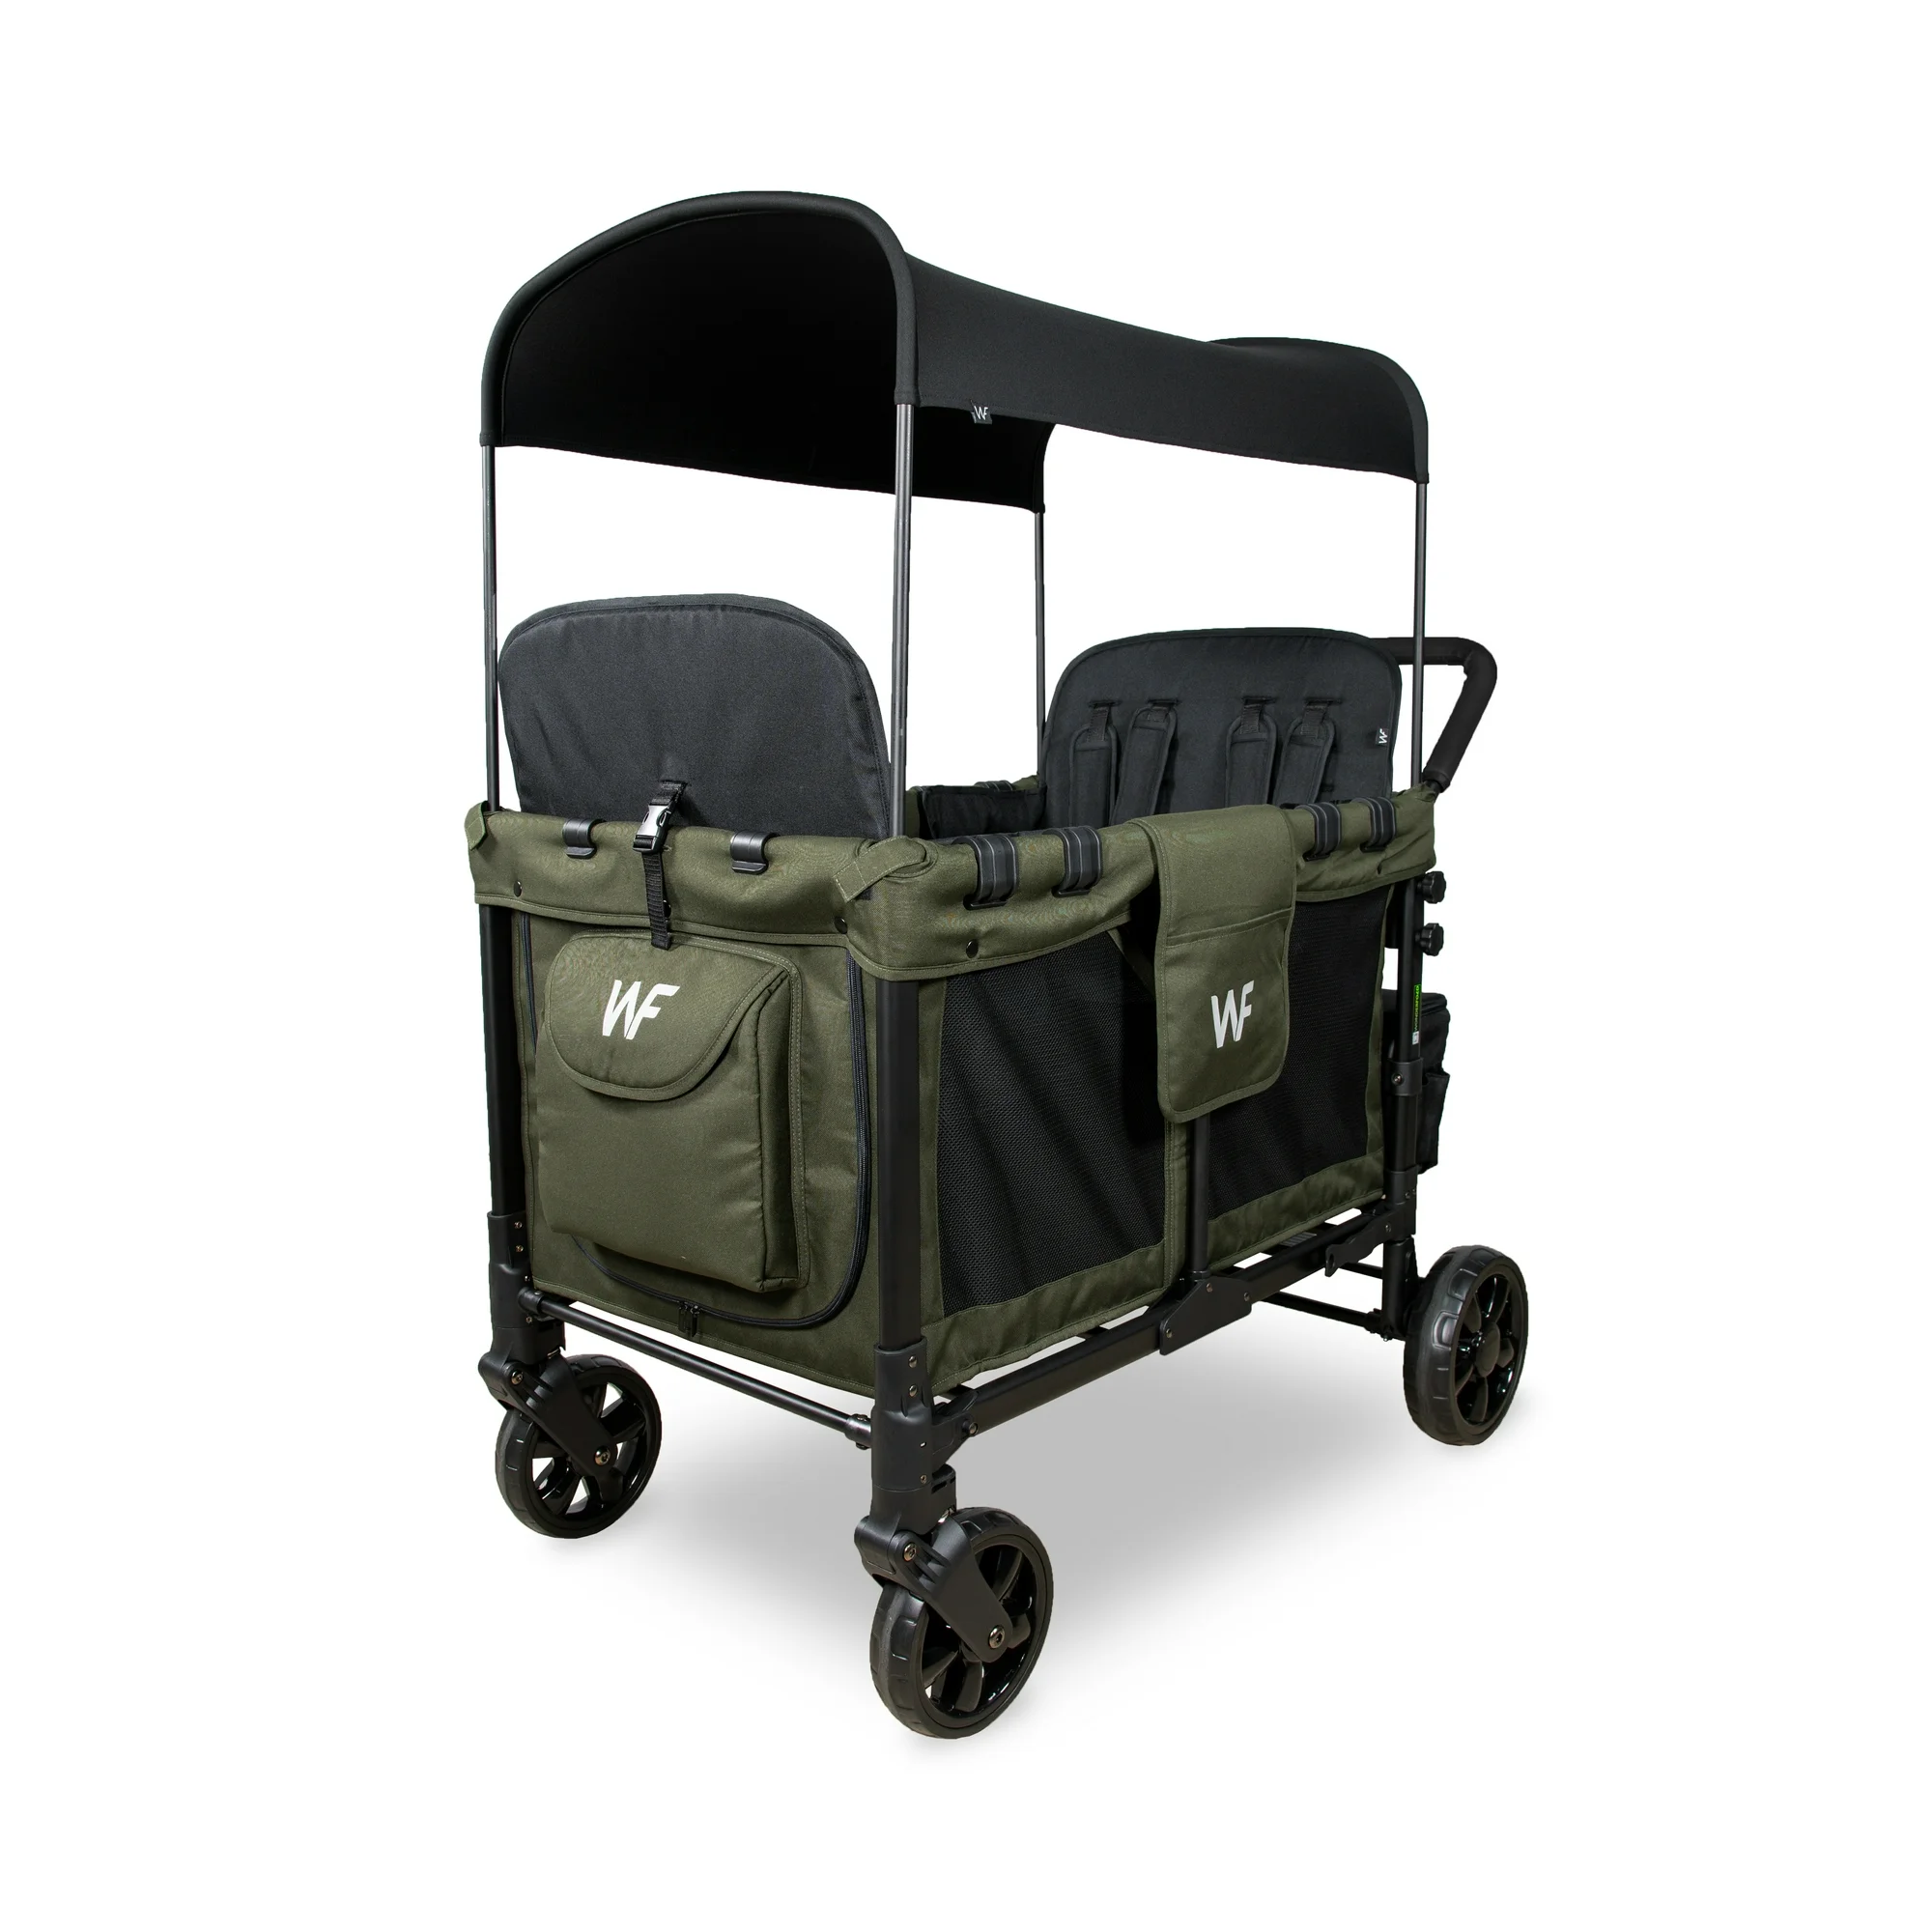 WONDERFOLD W4 4 Seater Multi Function Quad Stroller Wagon with Removable Raised Seats and Slidable Canopy Olive Green f48ee1fe 800c 40fd a33a cab09f651000.67c897e491f82842f27a60bab0a1f233 (1)